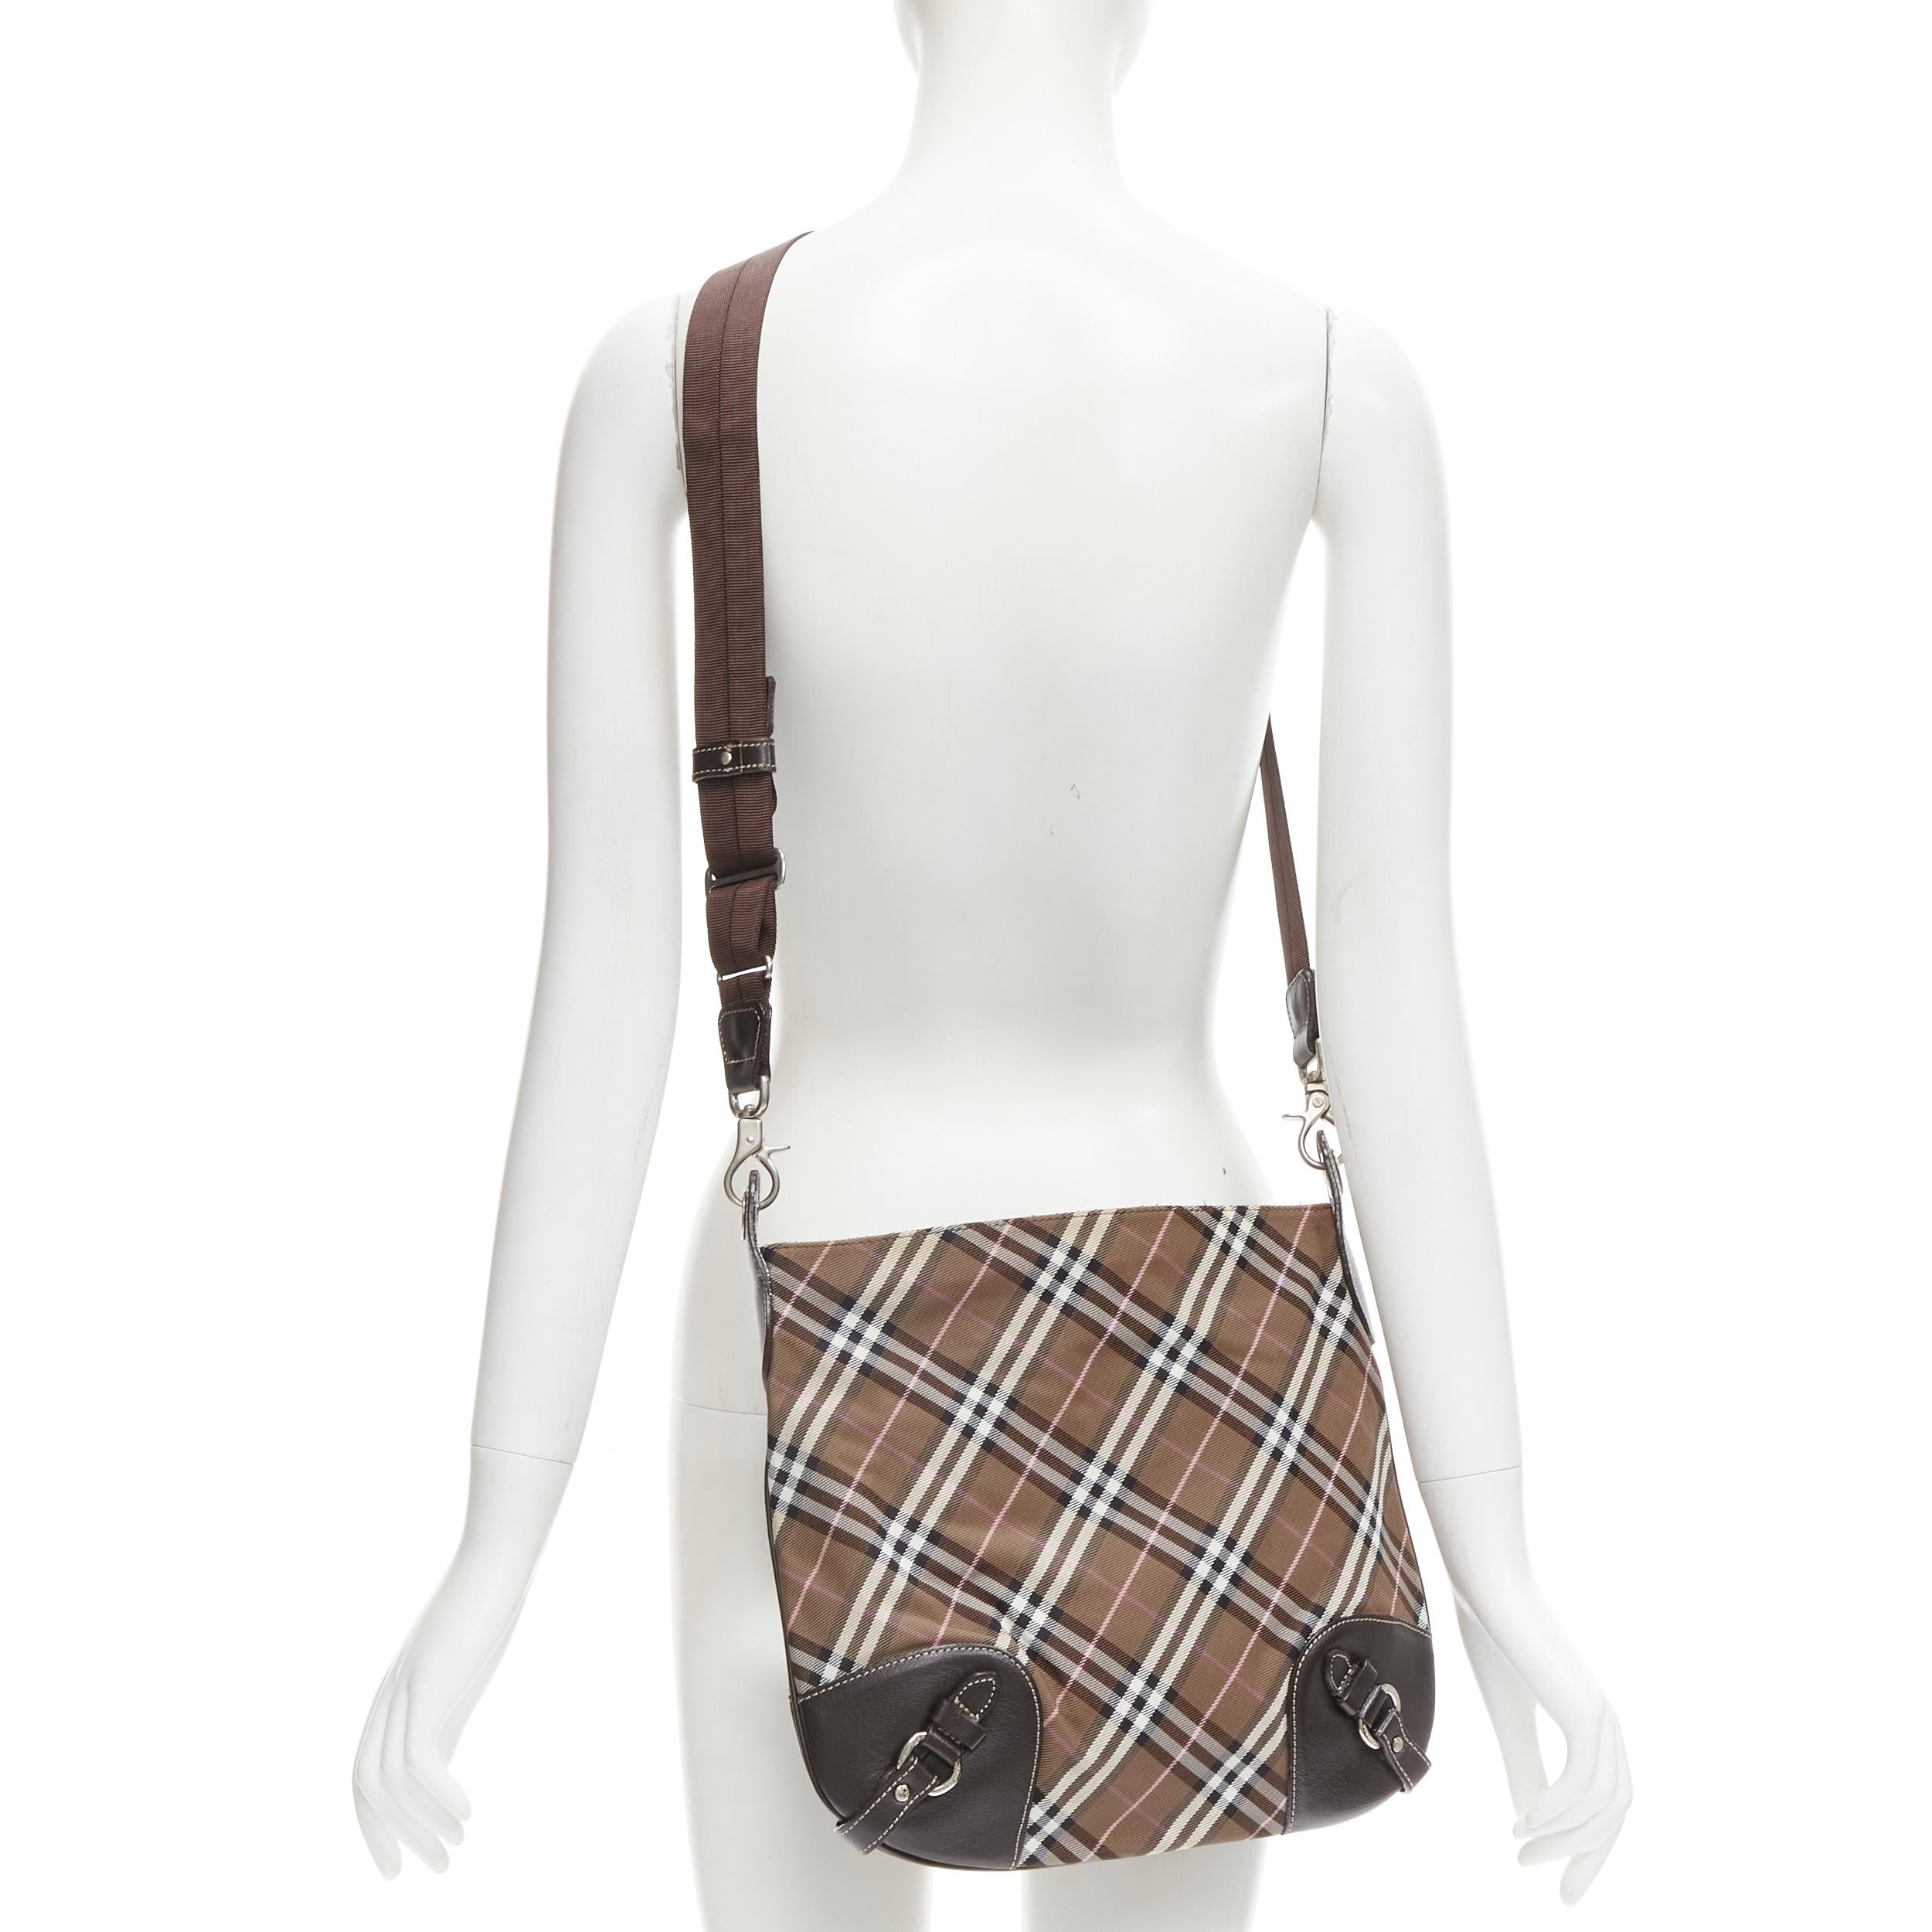 BURBERRY BLUE LABEL brown House Check leather buckle crossbody messenger bag
Brand: Burberry
Collection: House Check 
Color: Brown
Pattern: Checkered
Closure: Zip
Extra Detail: Detachable nylon sports strap. House Check upper. Silver-tone hardware.